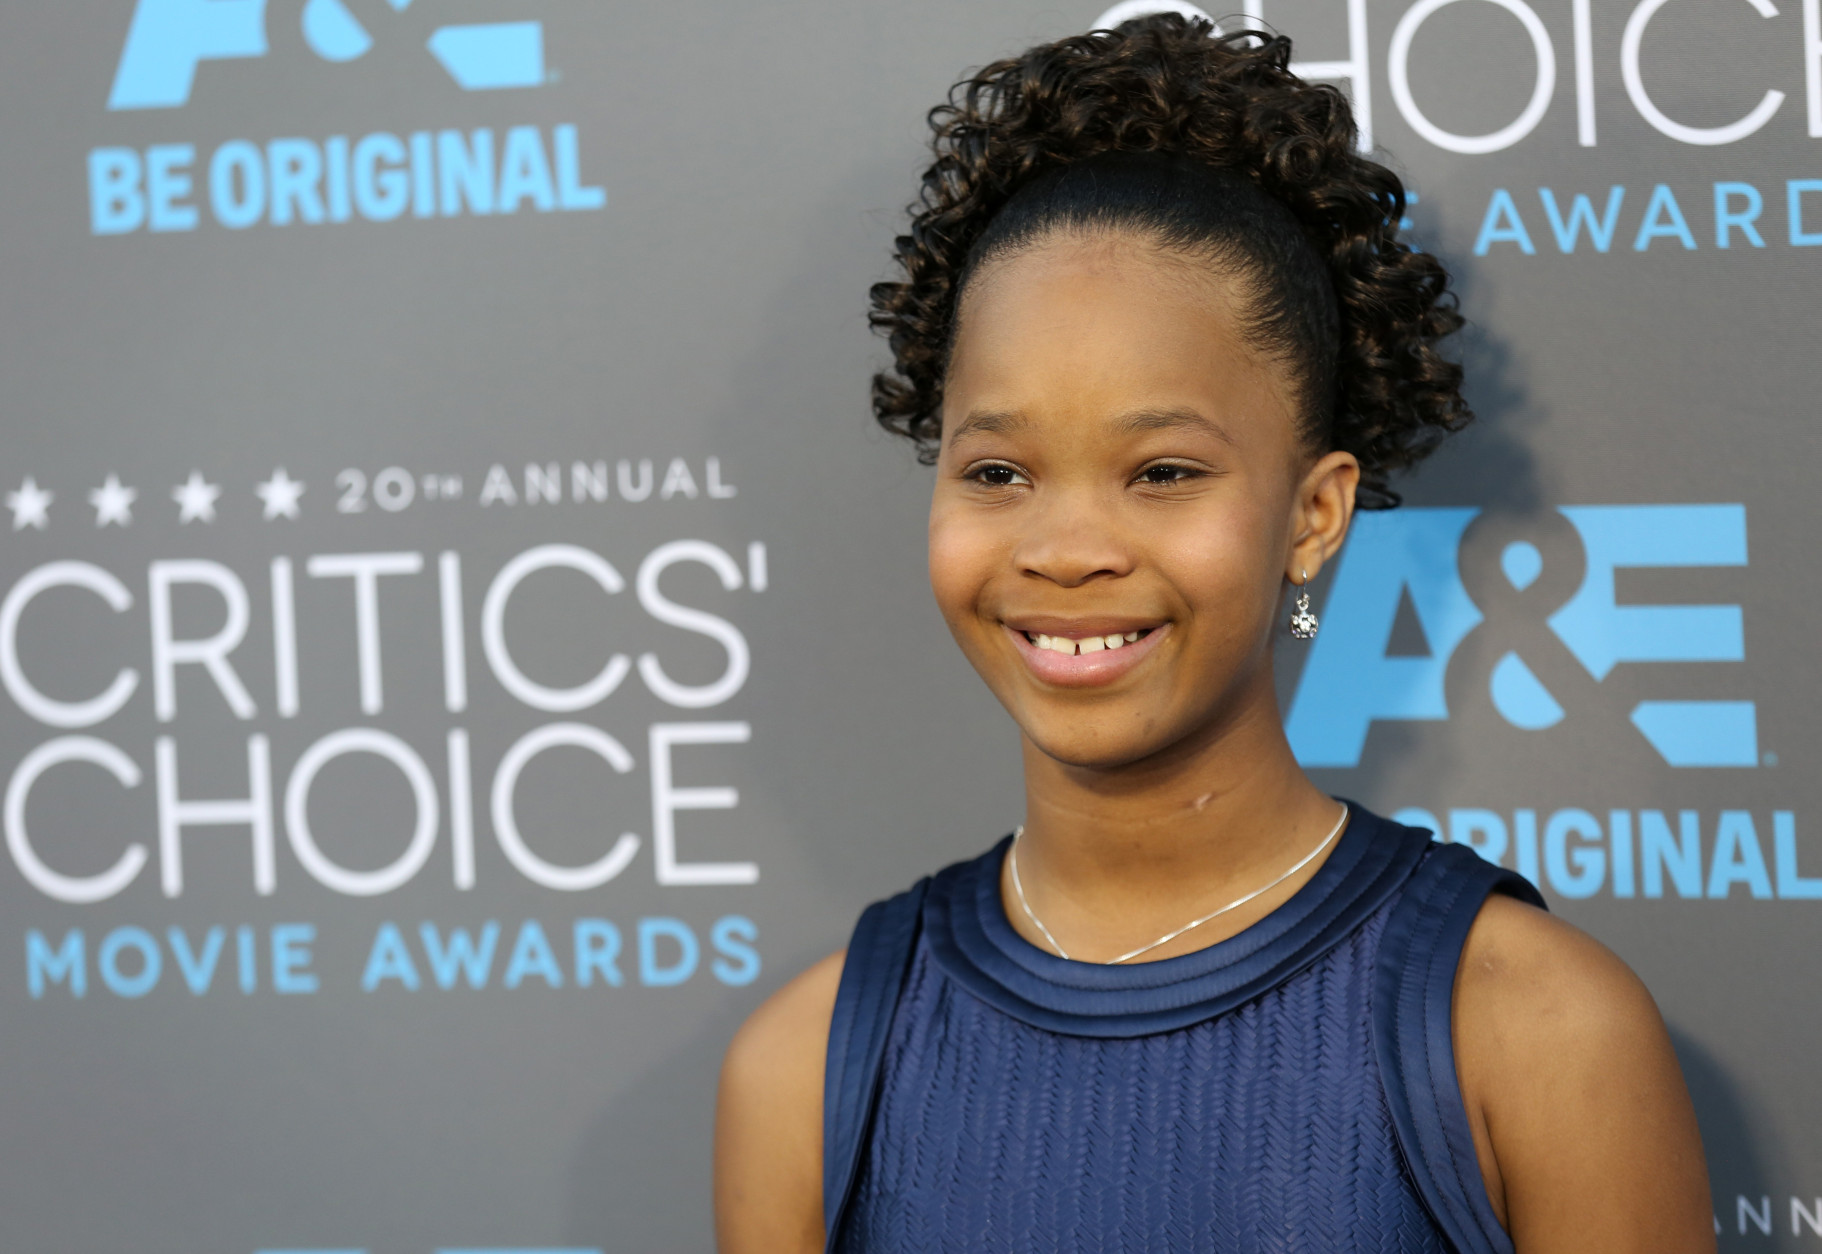 Quvenzhane Wallis arrives at the 20th annual Critics' Choice Movie Awards at the Hollywood Palladium on Thursday, Jan. 15, 2015, in Los Angeles. (Photo by Matt Sayles/Invision/AP)